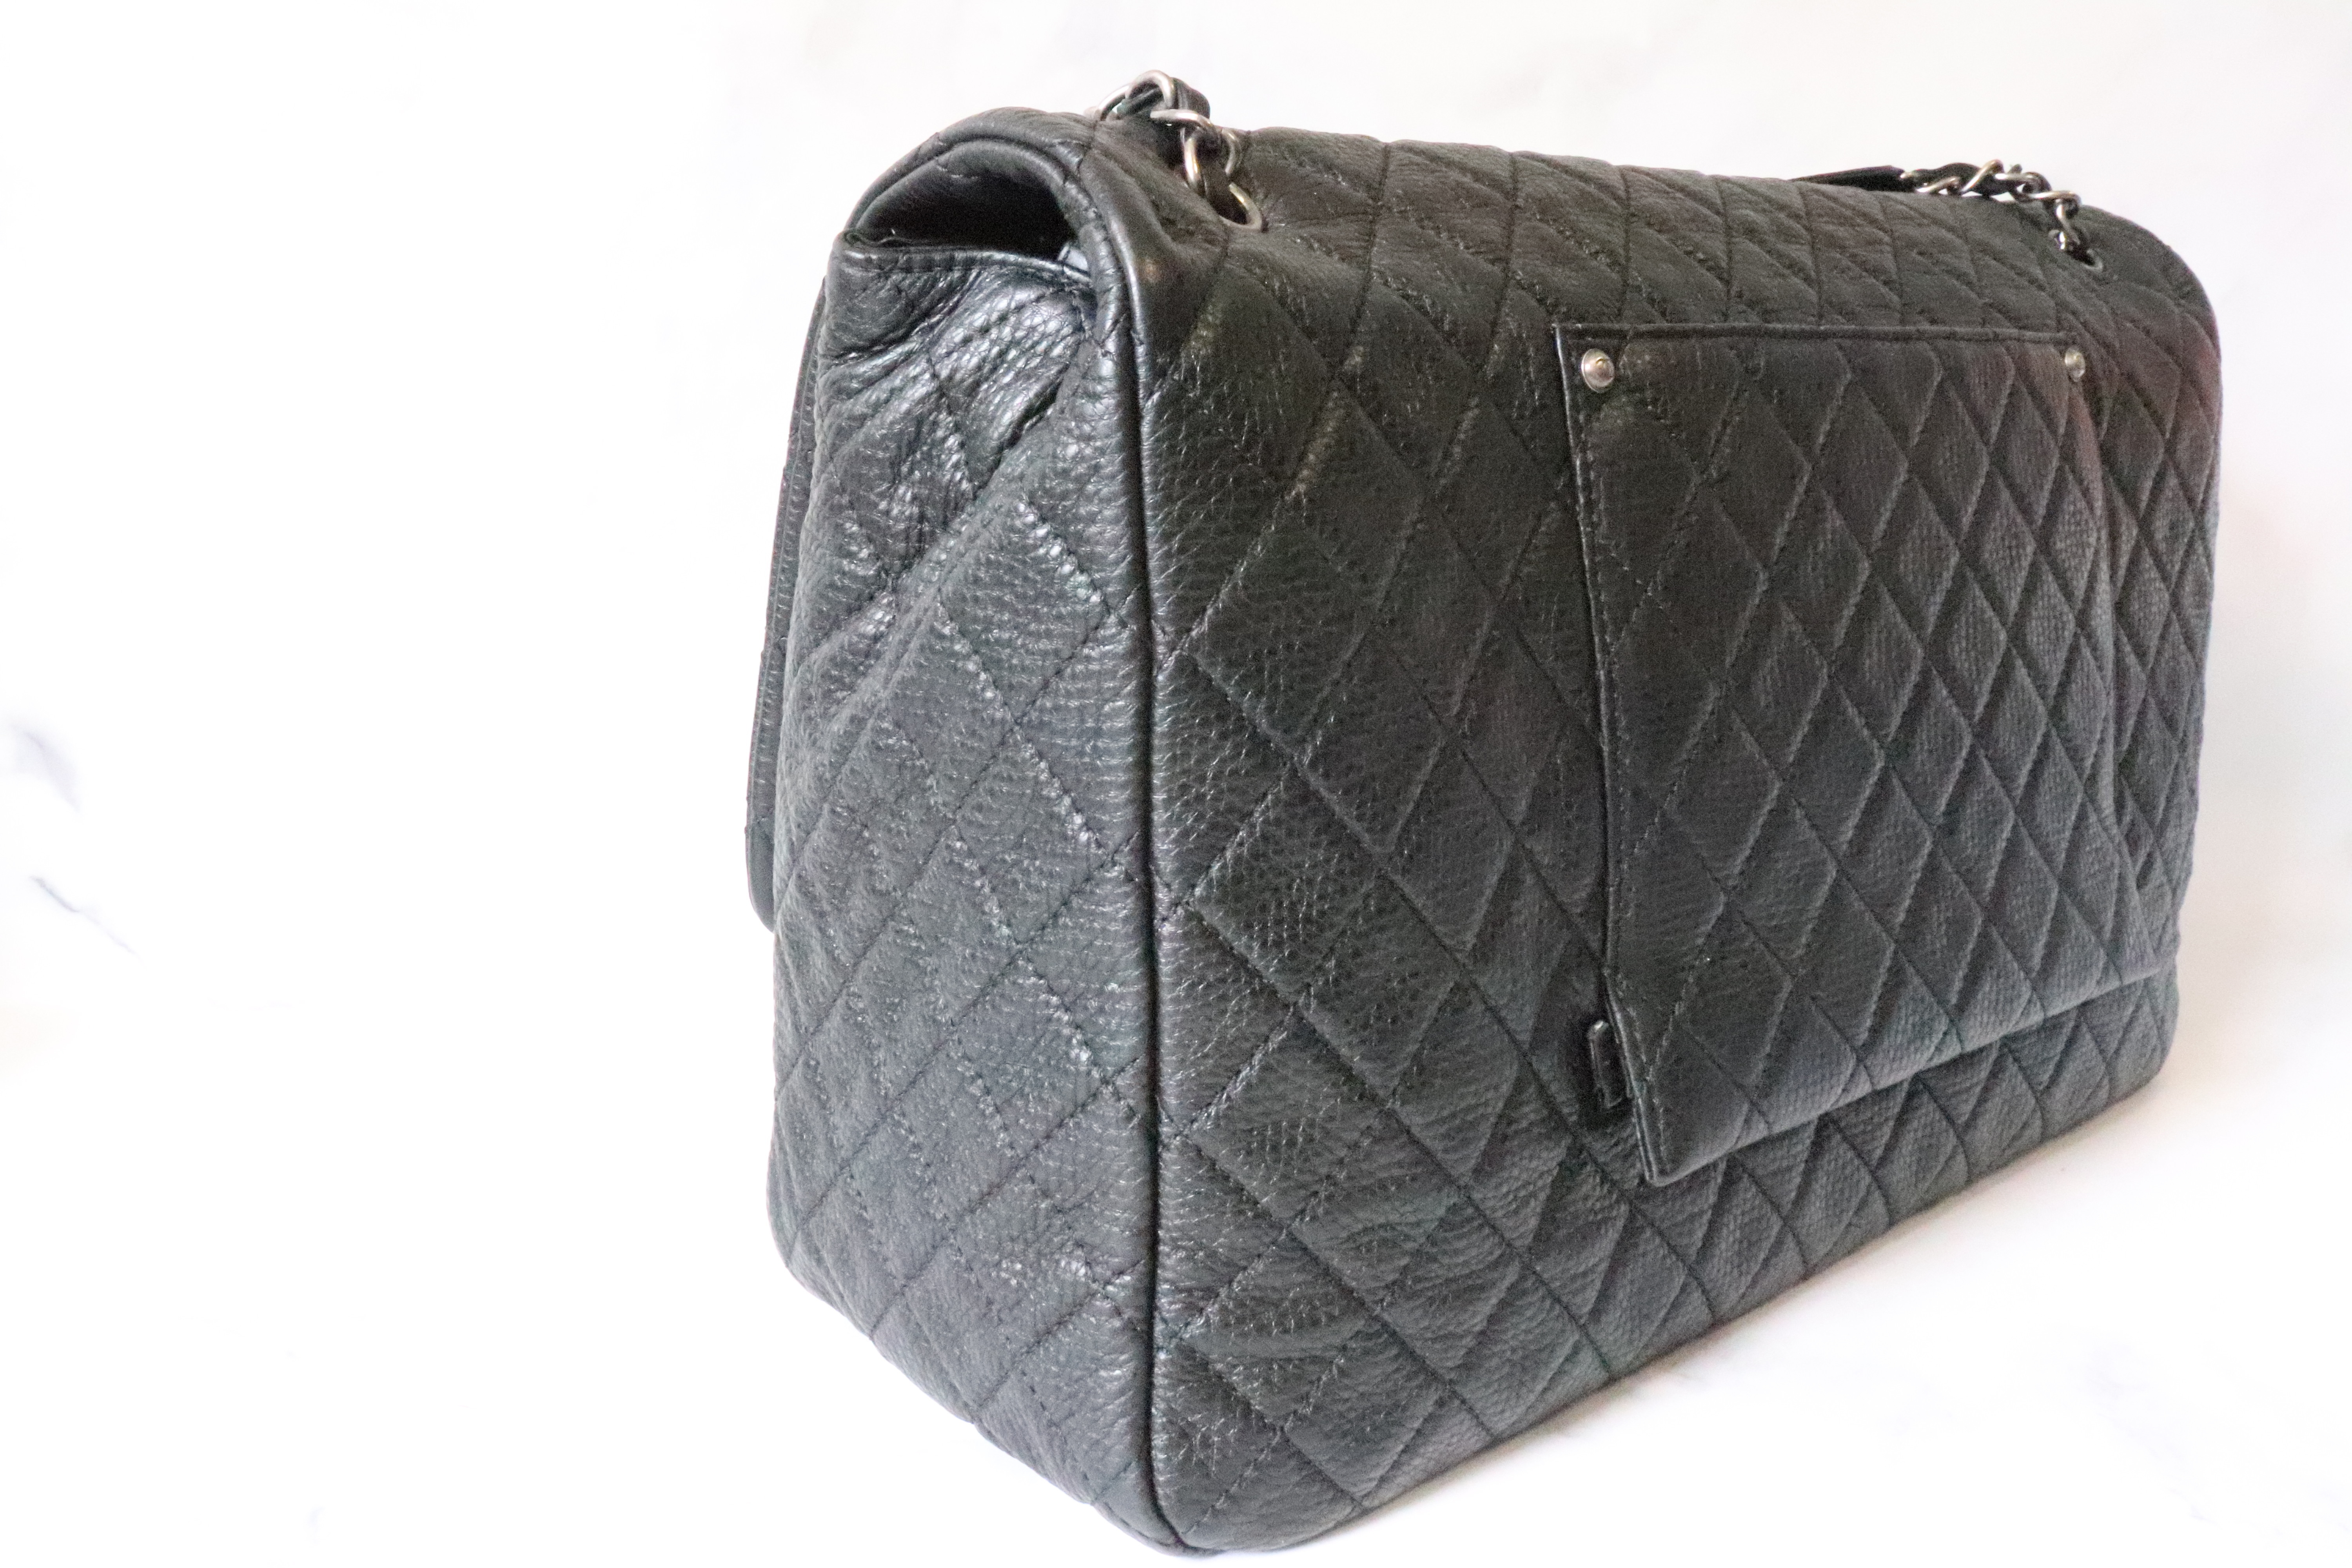 CHANEL Travel Bags & Handbags for Women, Authenticity Guaranteed